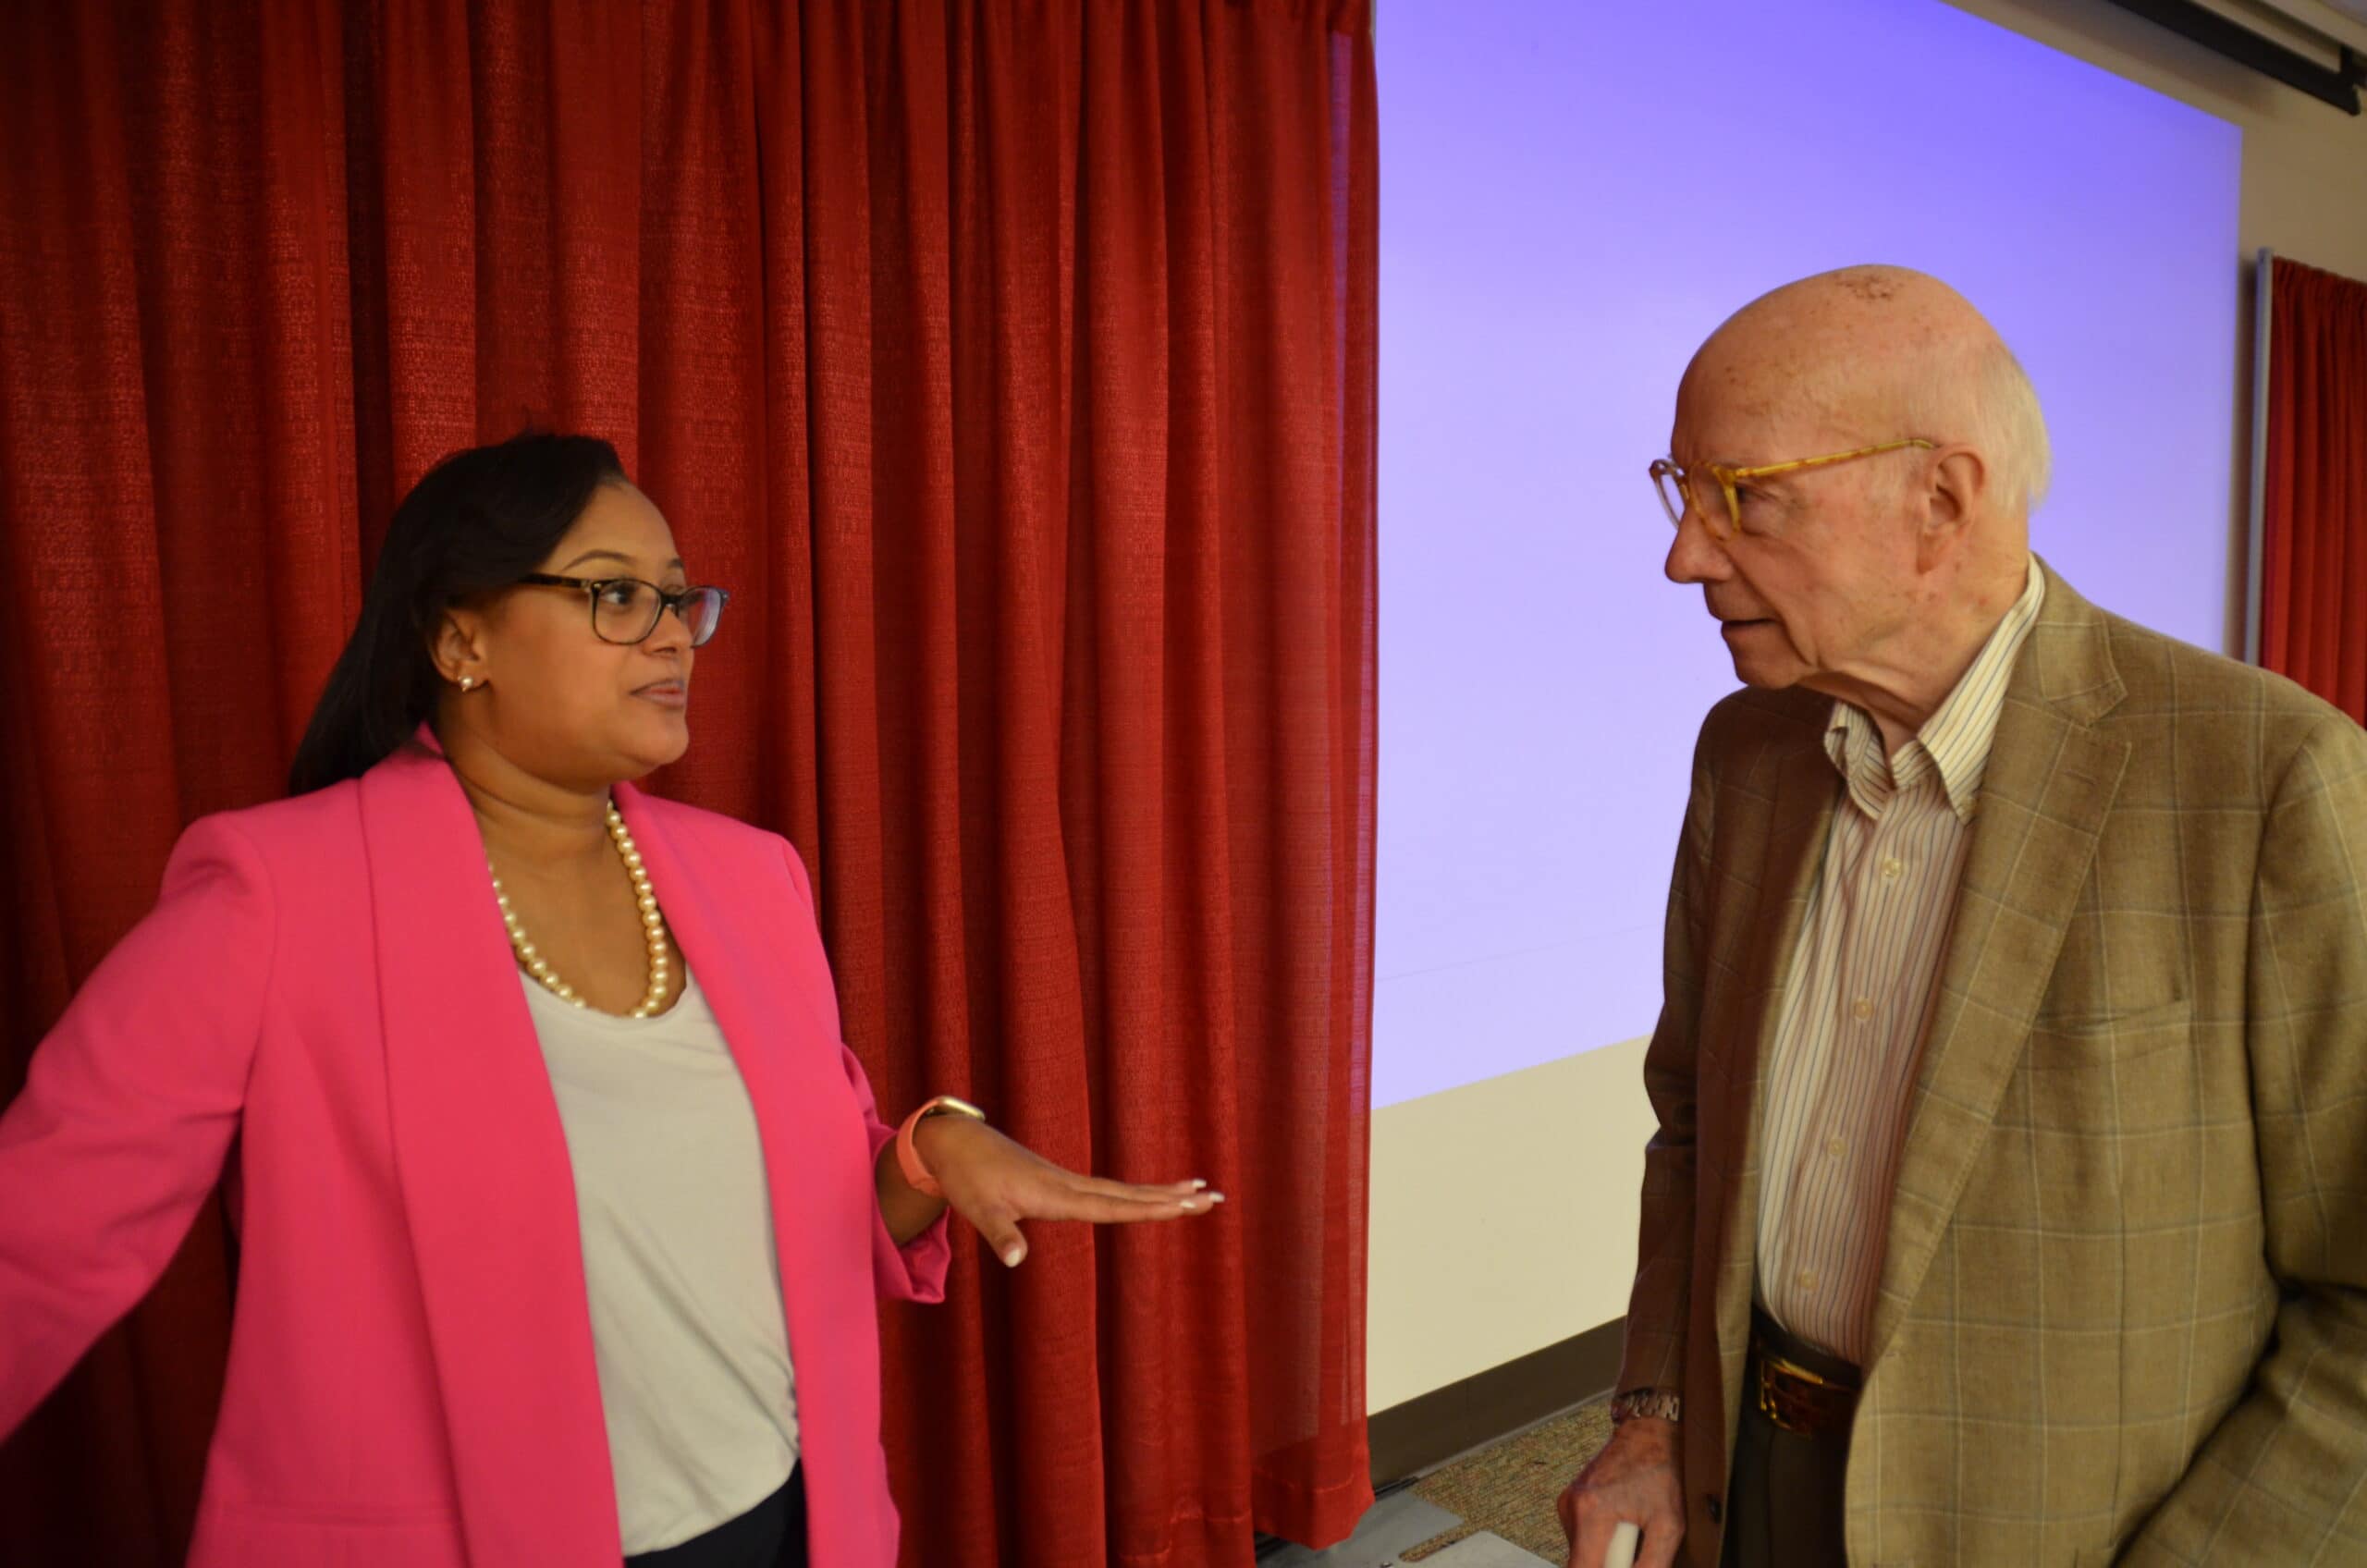 Joseph Bates, M.D., speaks to Samantha Wells, a doctoral student in the Fay W. Boozman College of Public Health, following her Grand Rounds presentation at the Arkansas Department of Health.